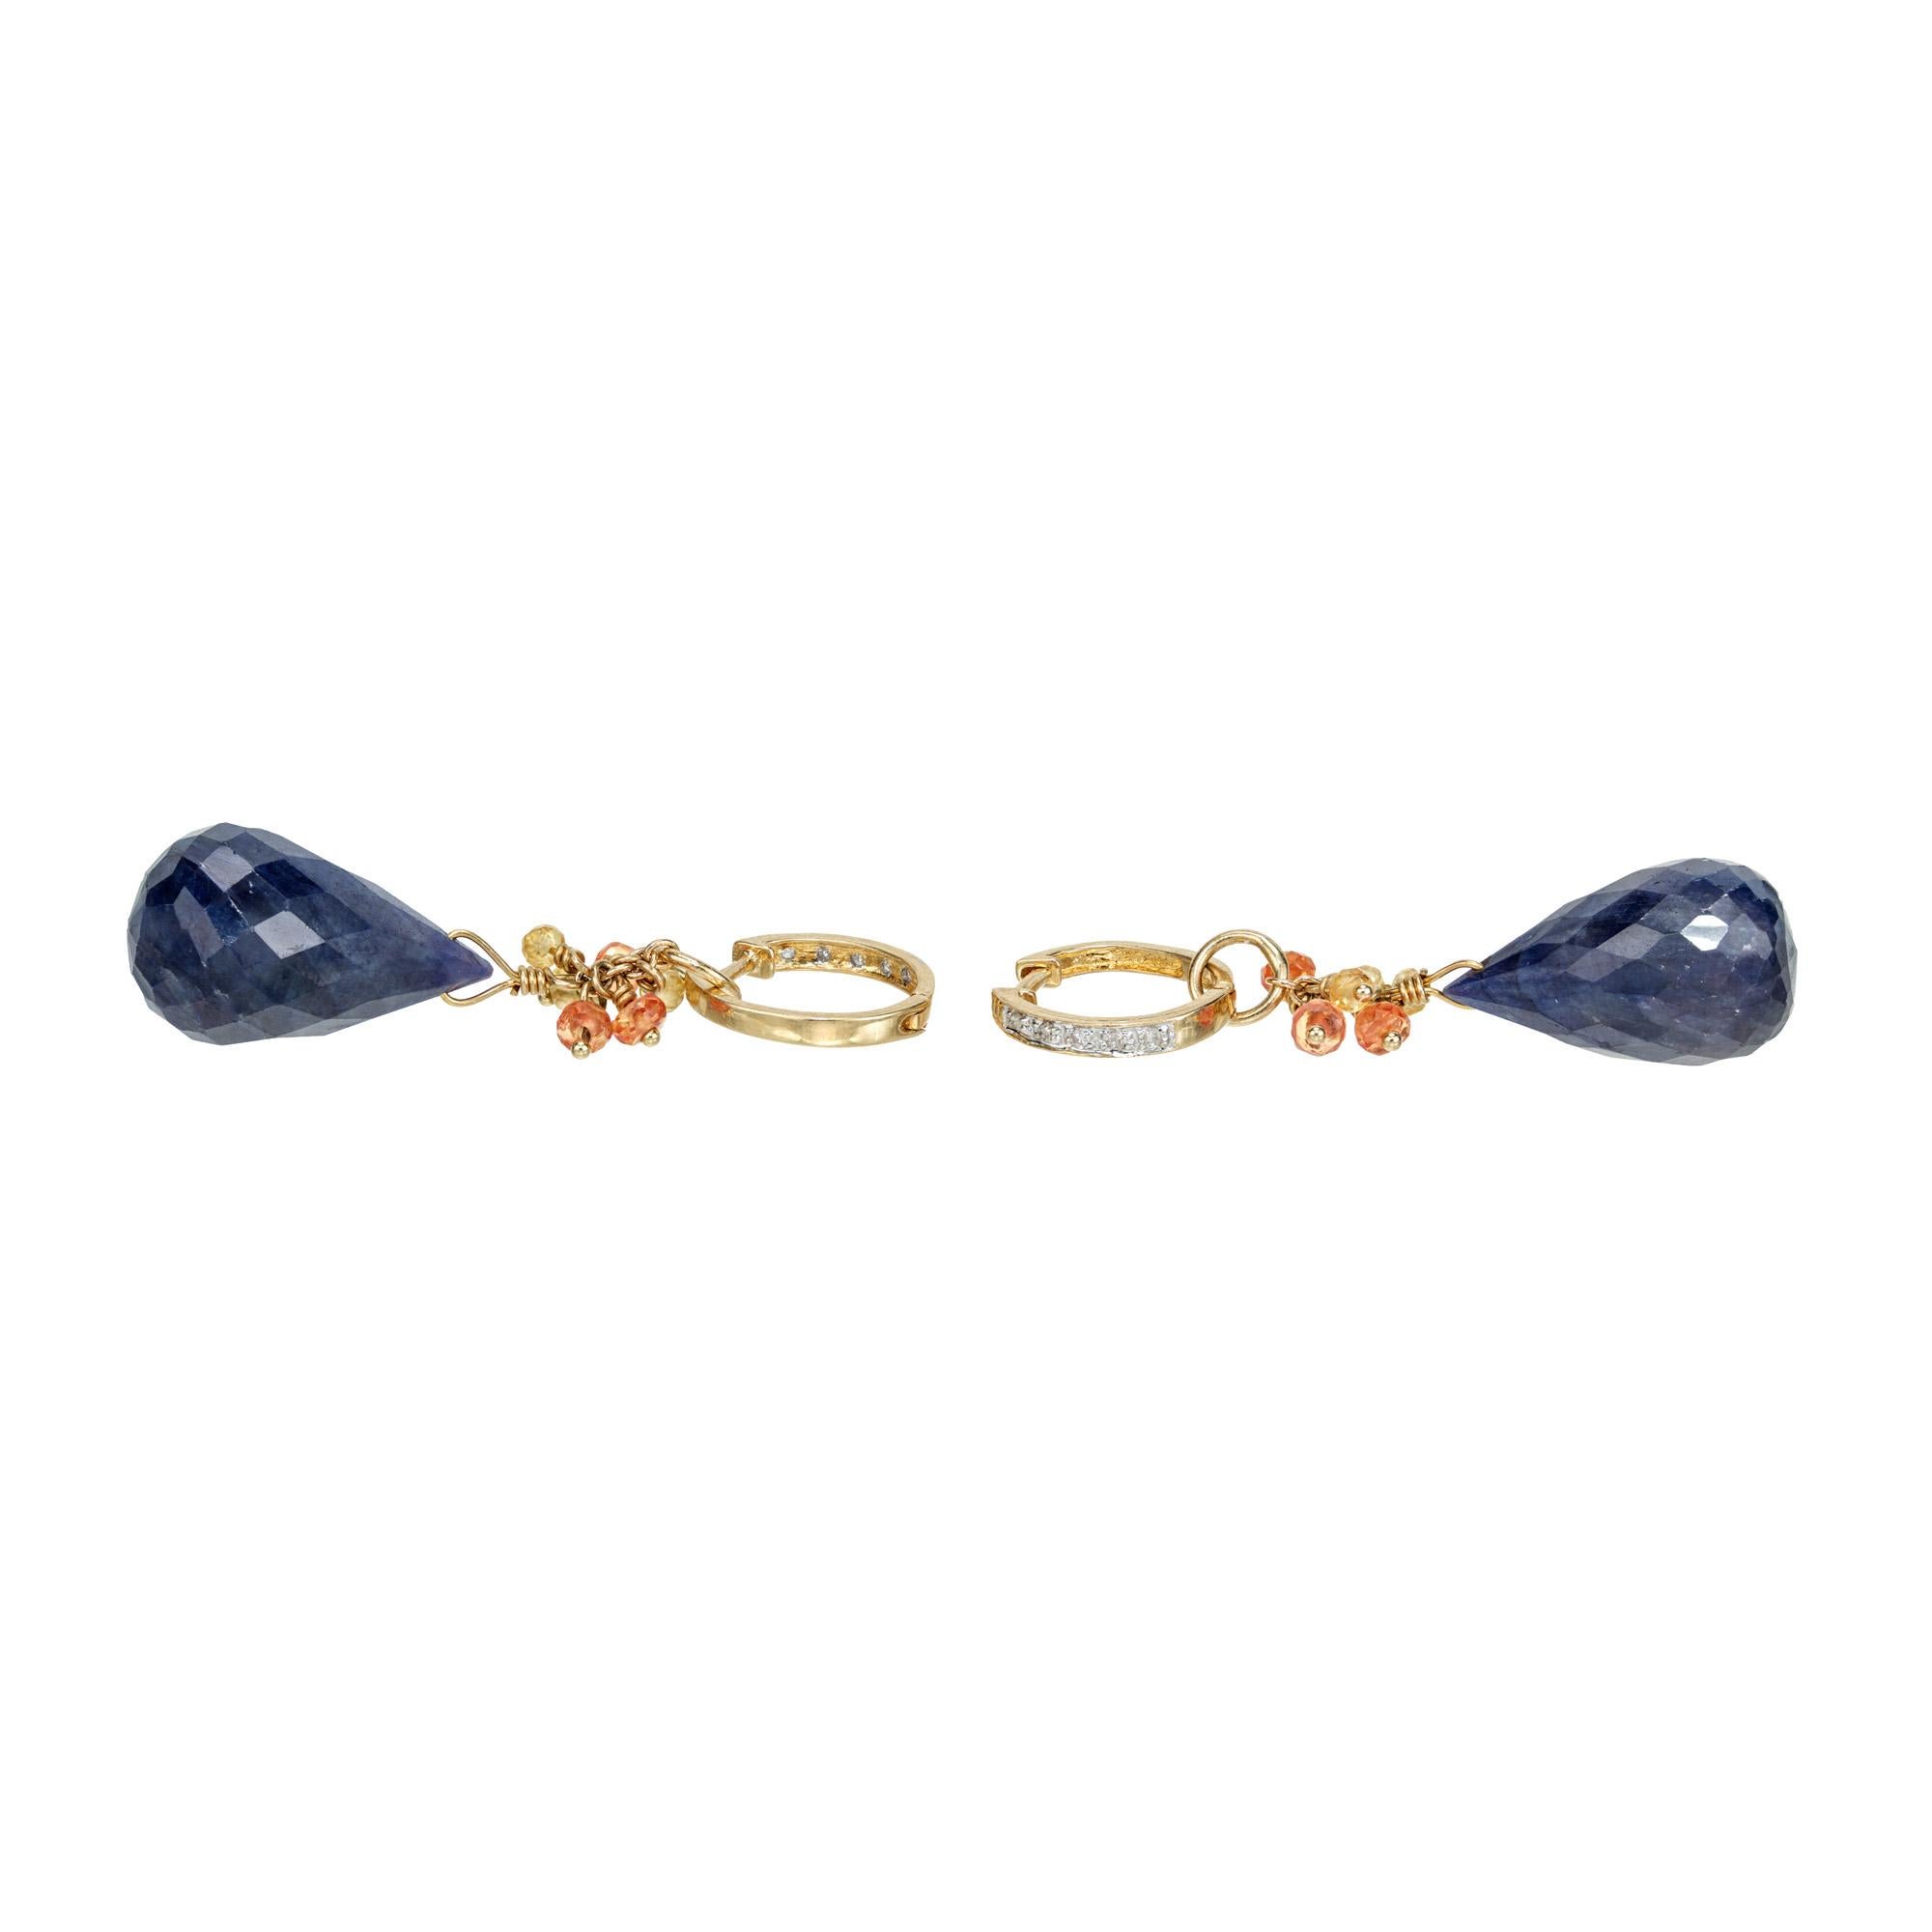 Deep blue sapphire and diamond dangle earrings. 2 rich blue briolette sapphires totaling 24.00cts, accented with 12 orange and yellow bead sapphires, that dangle from two diamond 14k yellow gold hoops. Day and night style earrings. The dangles can